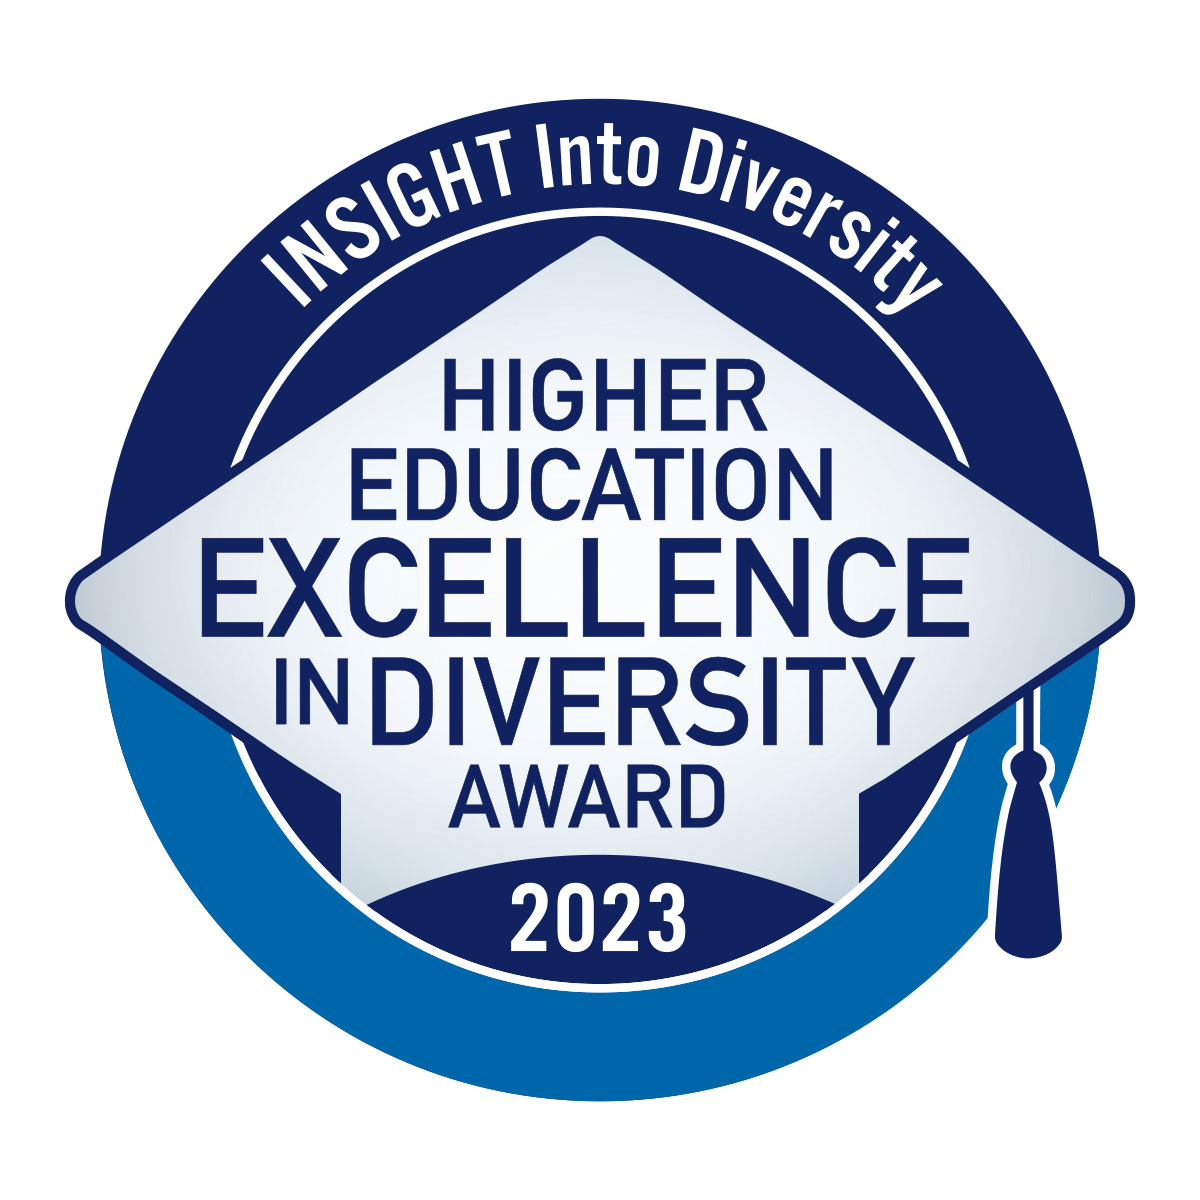 Higher Education Excellence in Diversity Award 2023